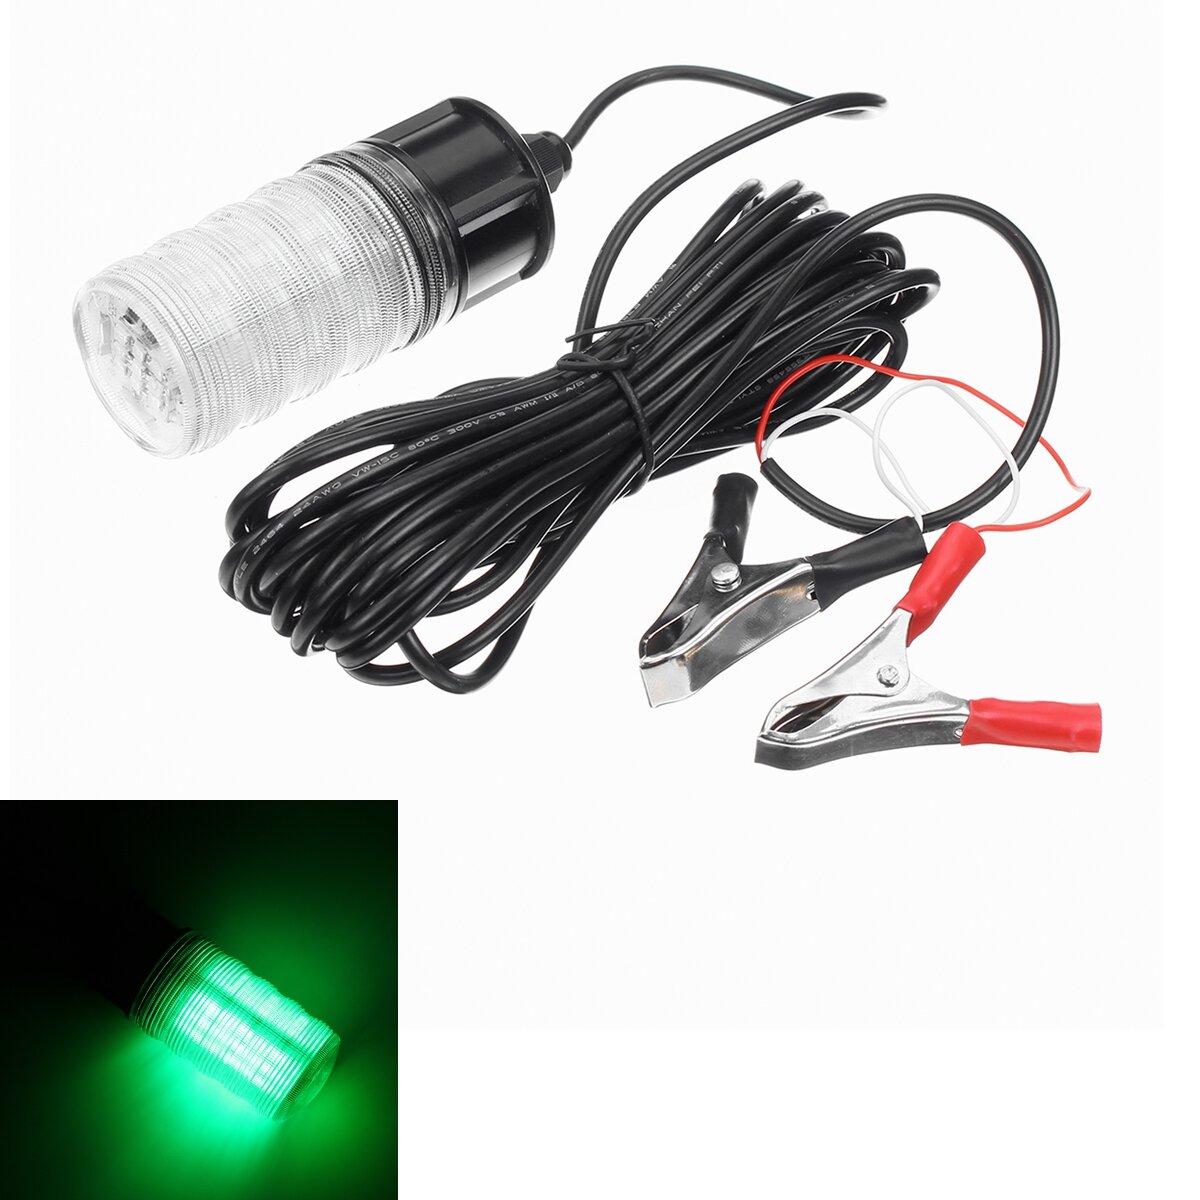 12V LED Underwater Submersible Night Fishing Light Crappie Shad Squid Boat  Lamp Sale - Banggood USA Mobile-arrival notice